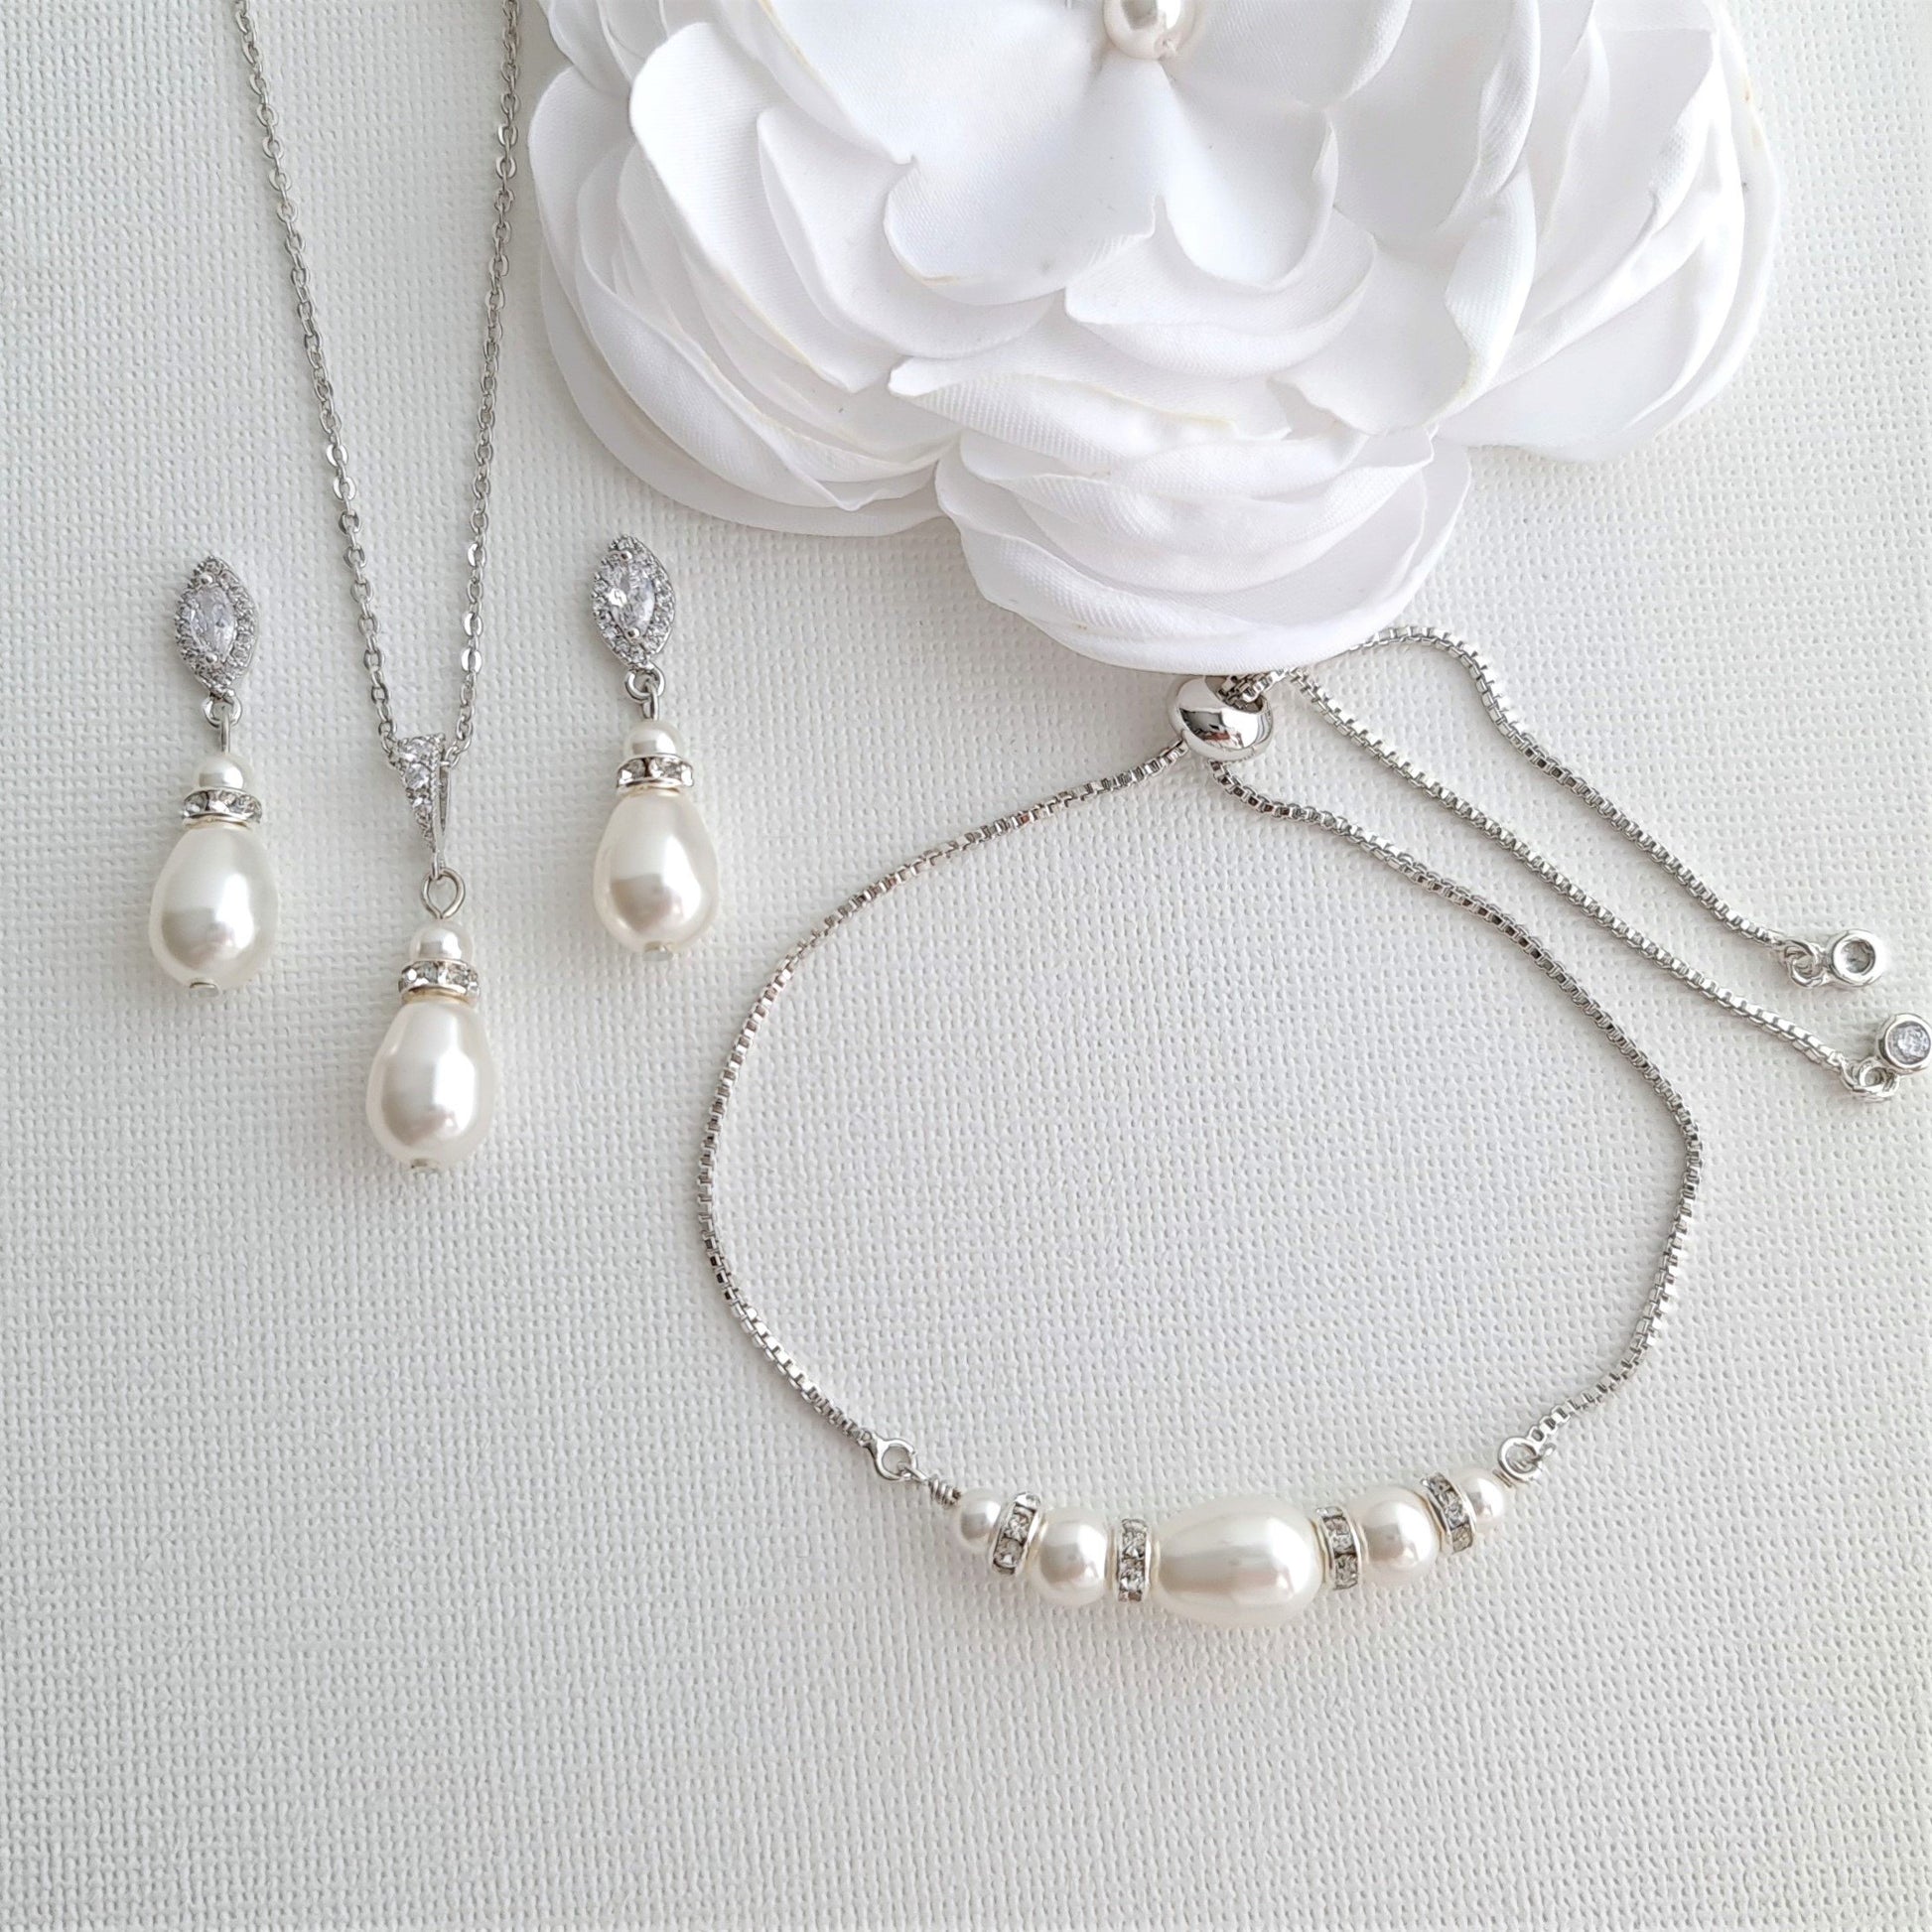 Buy Pearl Earring Necklace Bracelet Bridesmaids & Bridal Jewelry